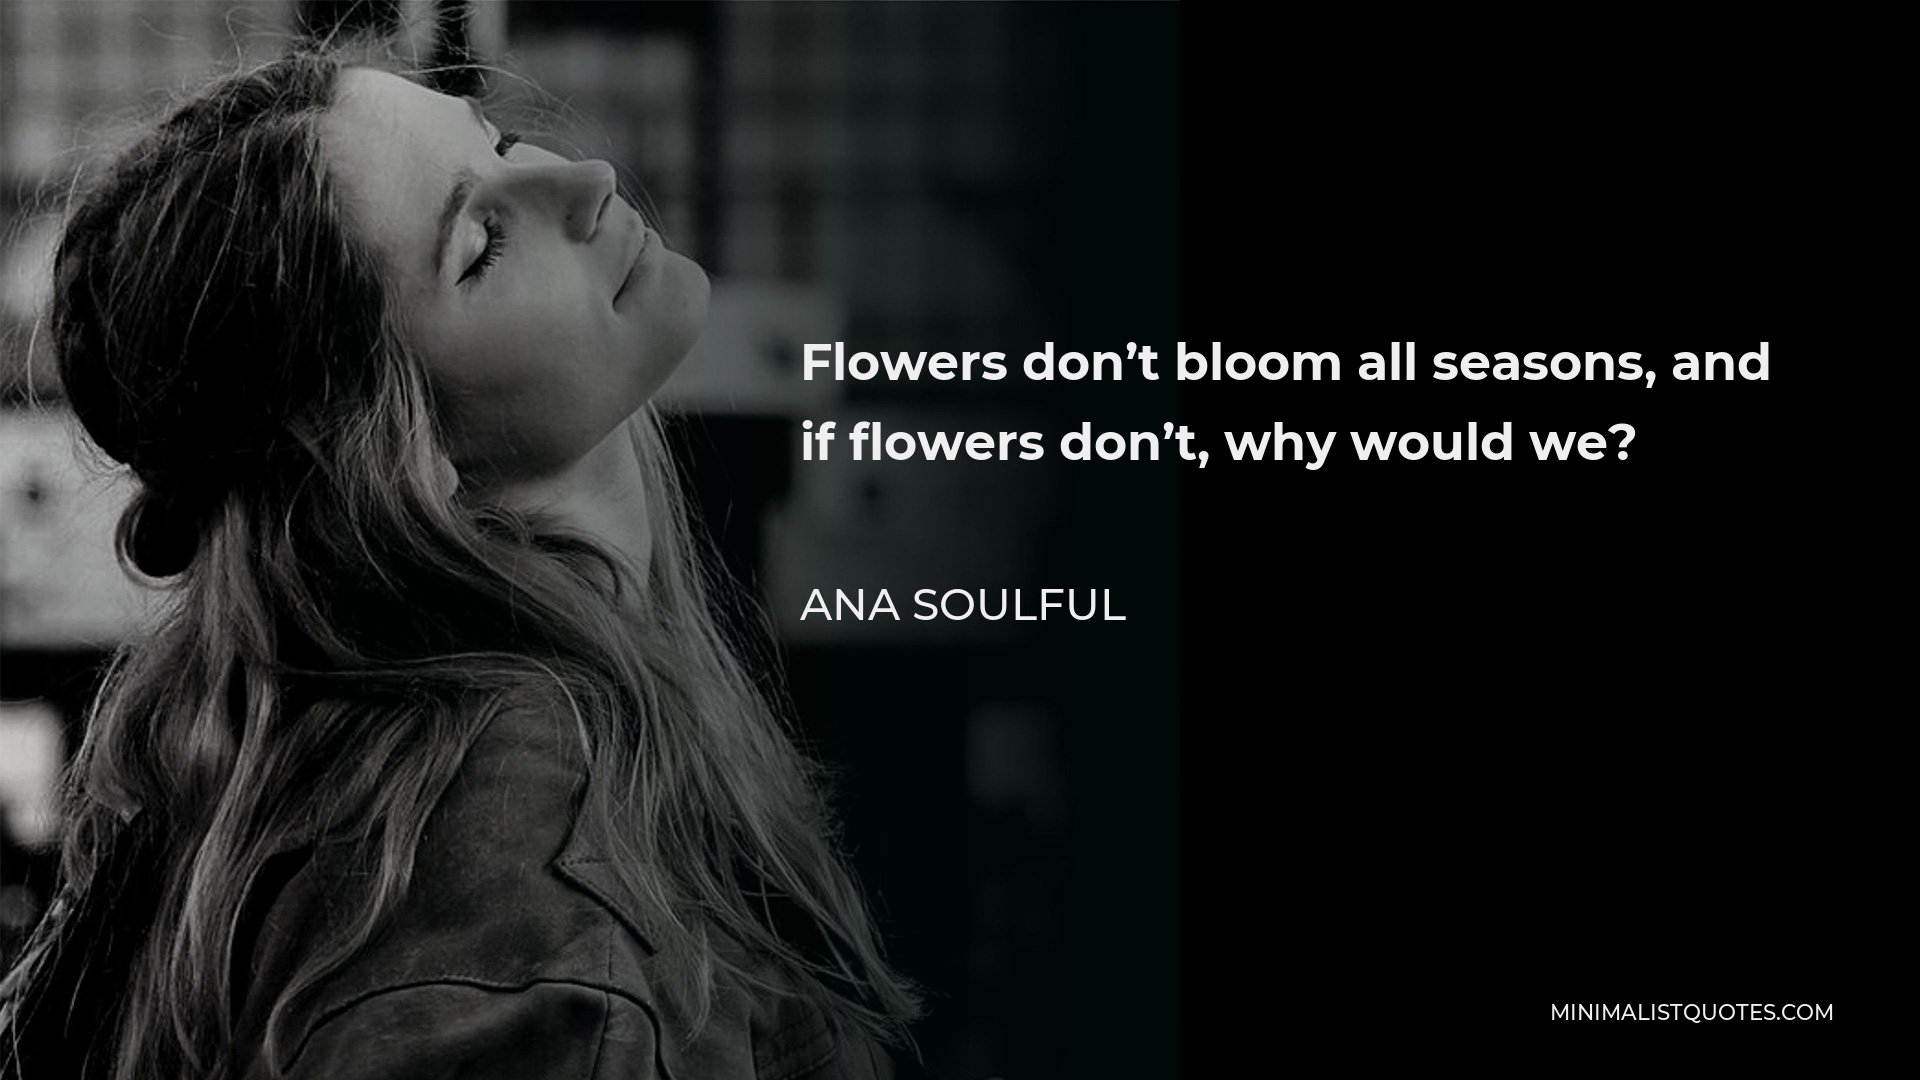 Ana Soulful Quote - Flowers don’t bloom all seasons, and if flowers don’t, why would we?